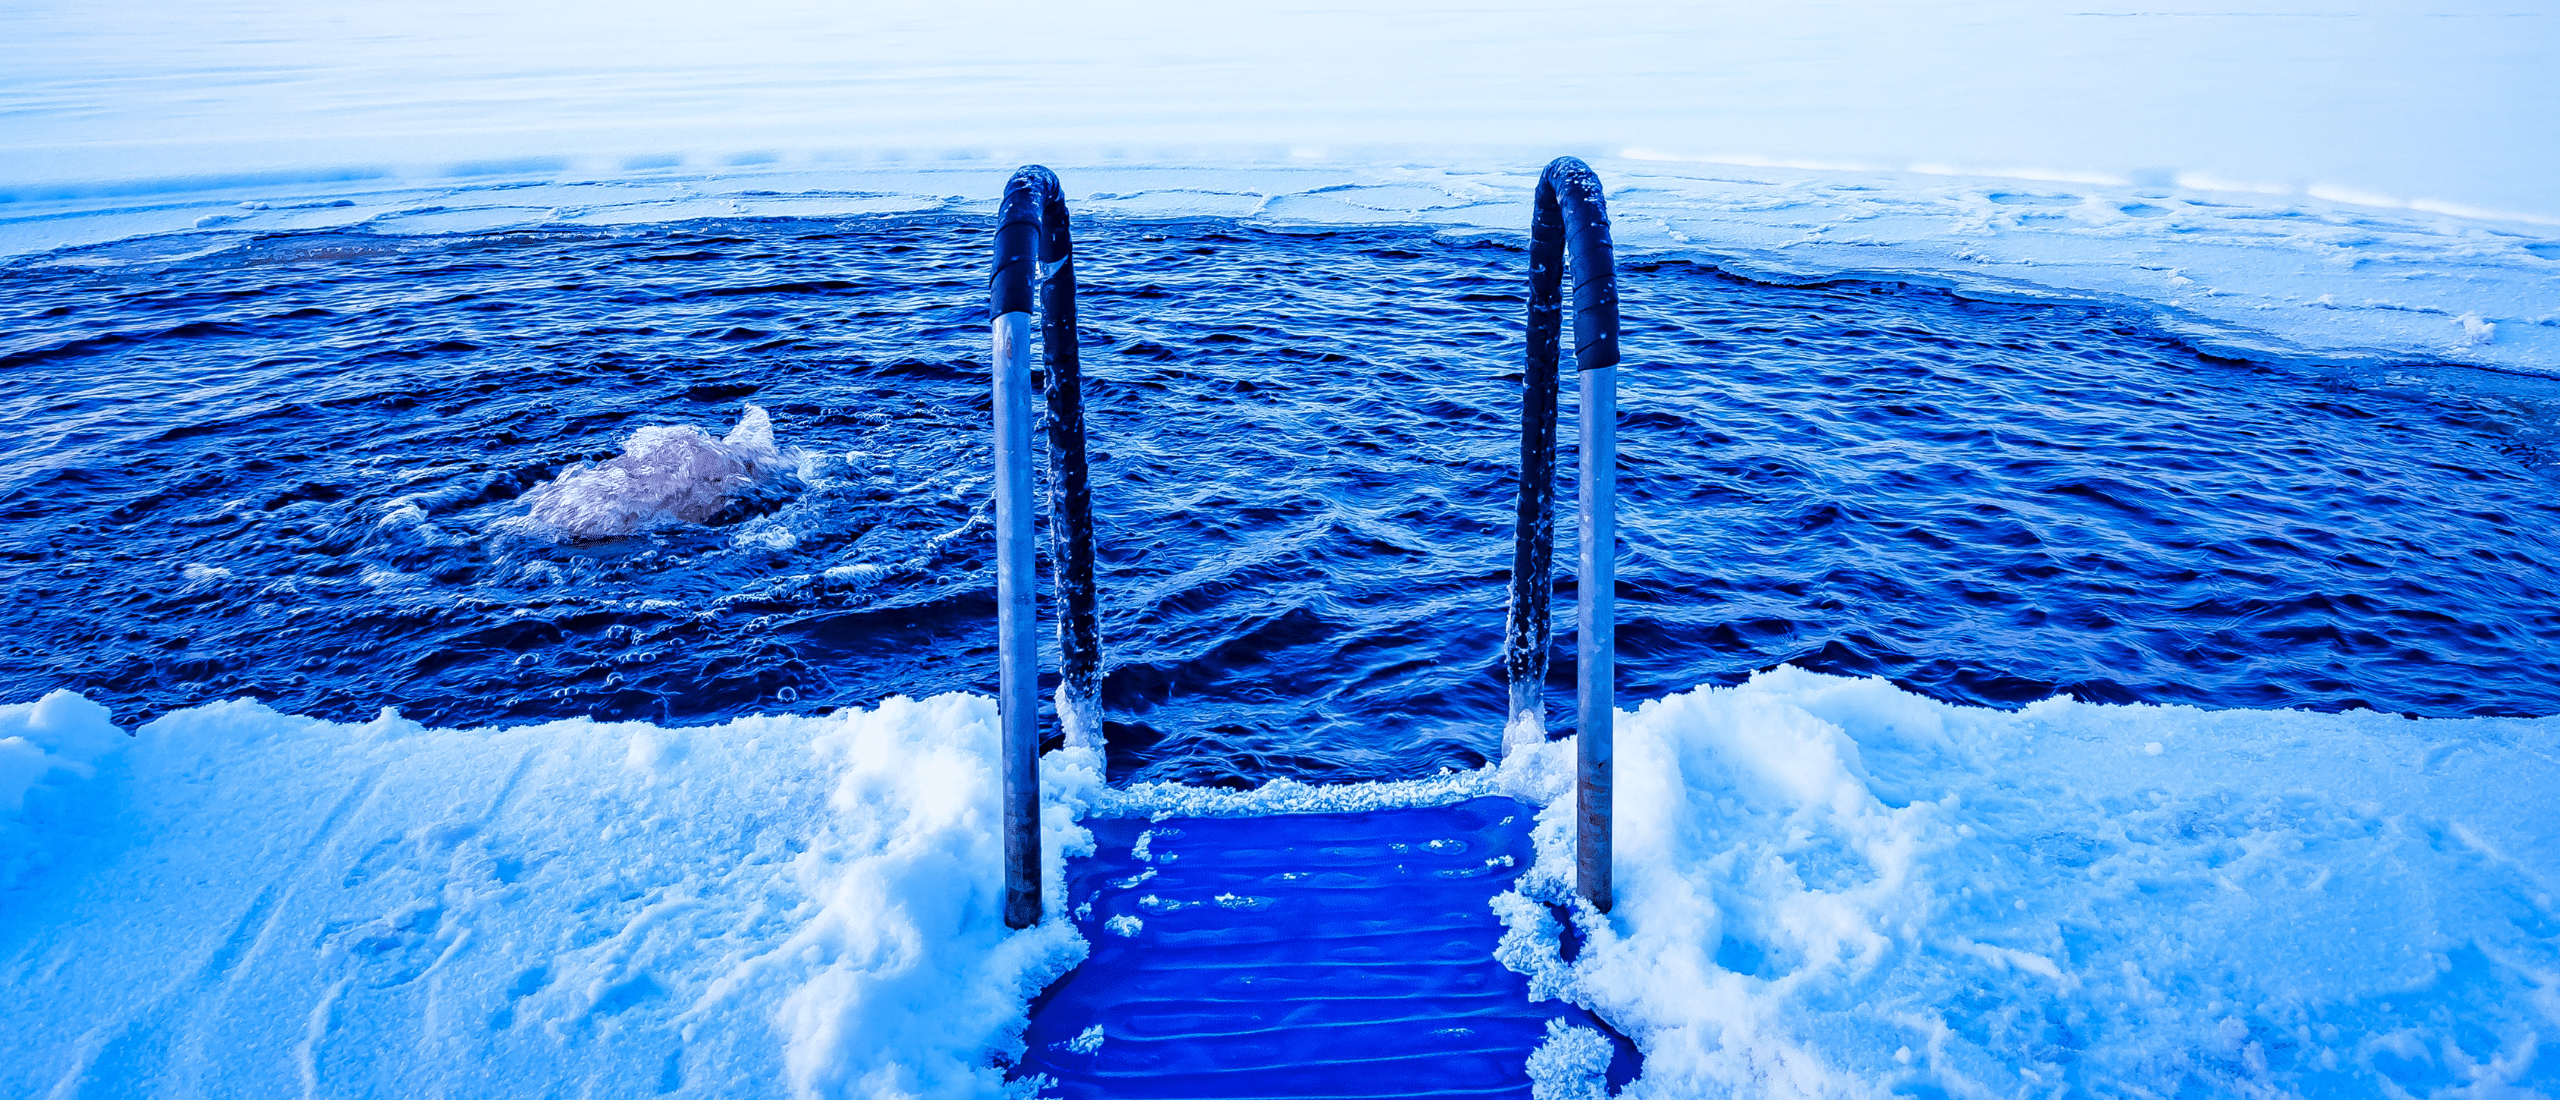 A ladder drops into an icy lake